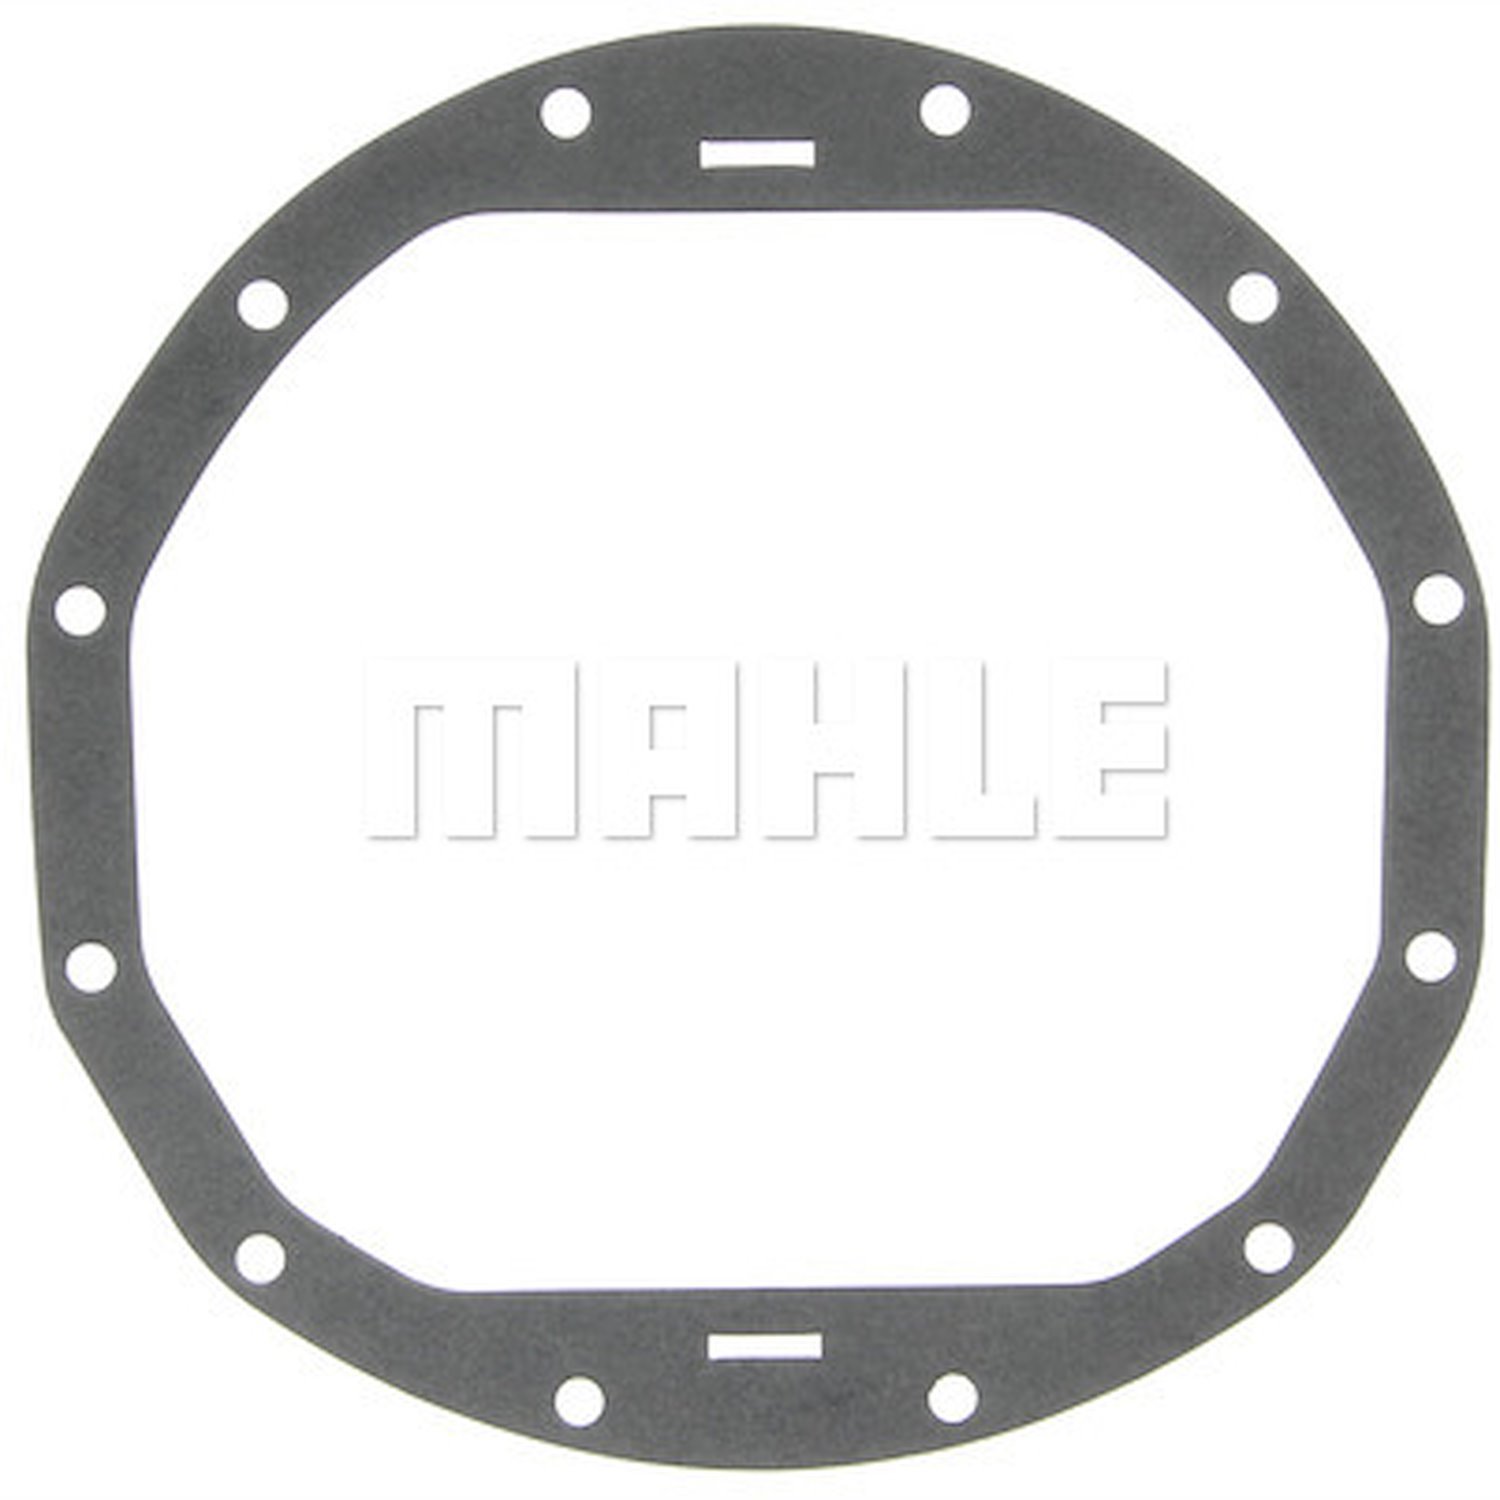 Rear Differential Cover Gasket GM 12 Bolt [Steel Core Composite PTFE Coated]